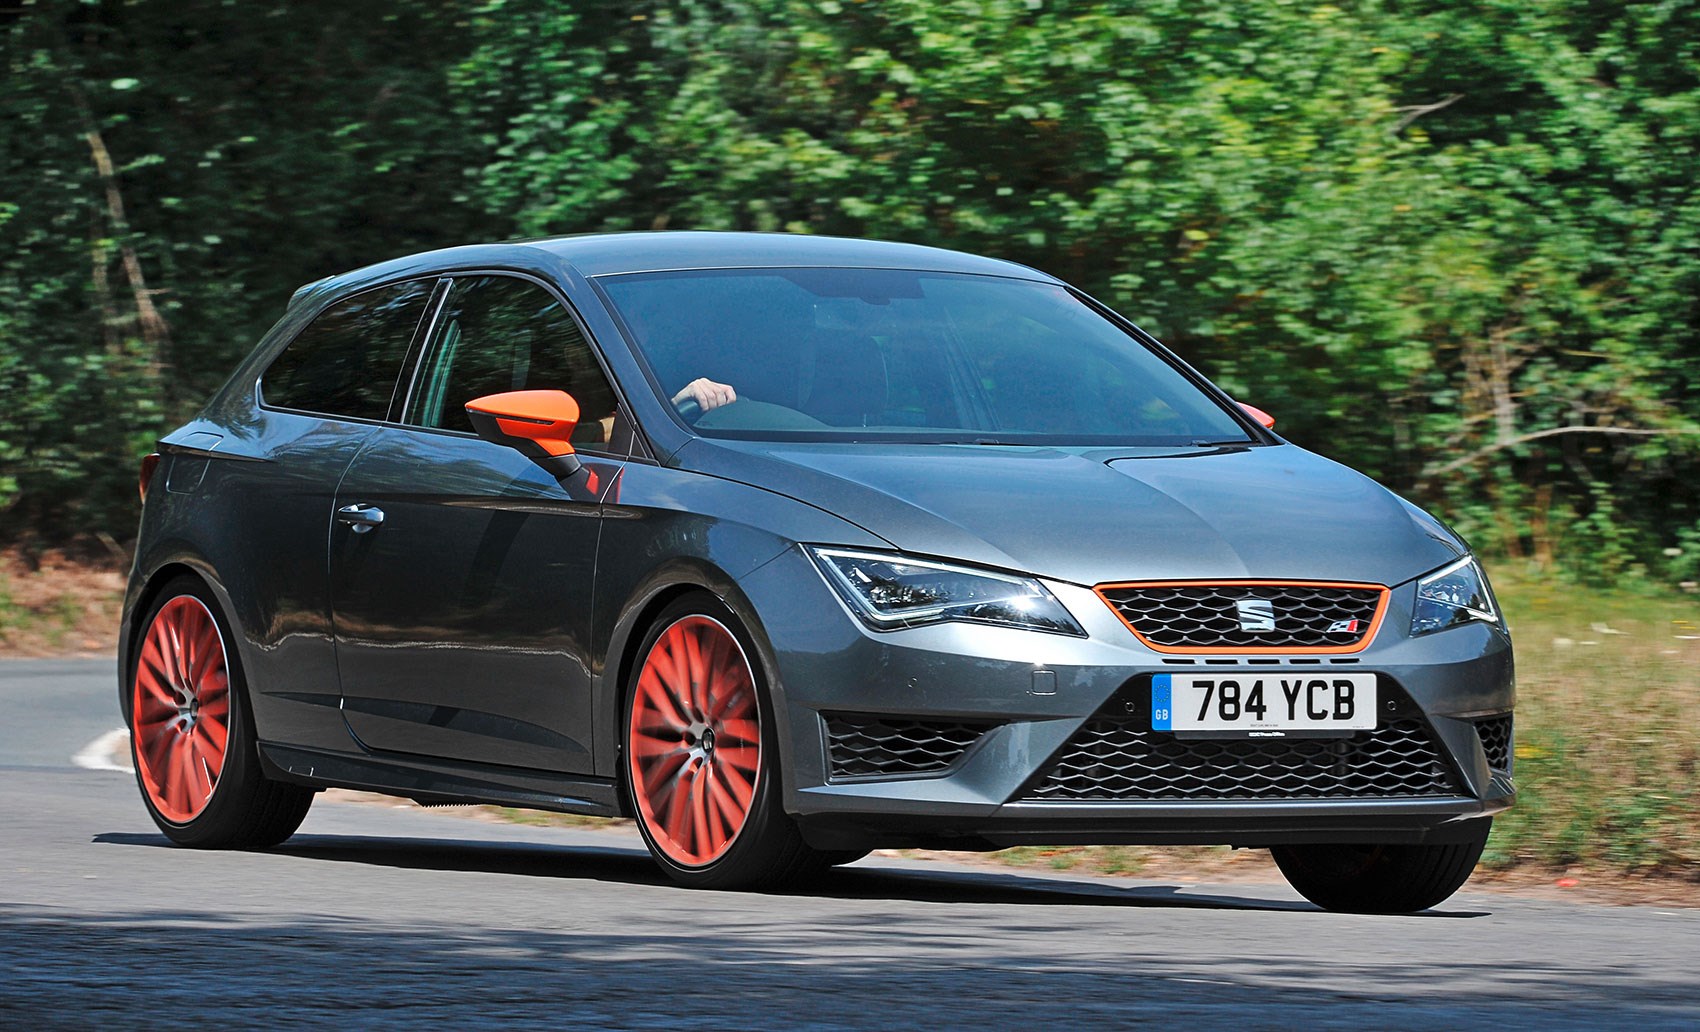 MOTORING REVIEW: Cupra Leon is performance version of SEAT Leon